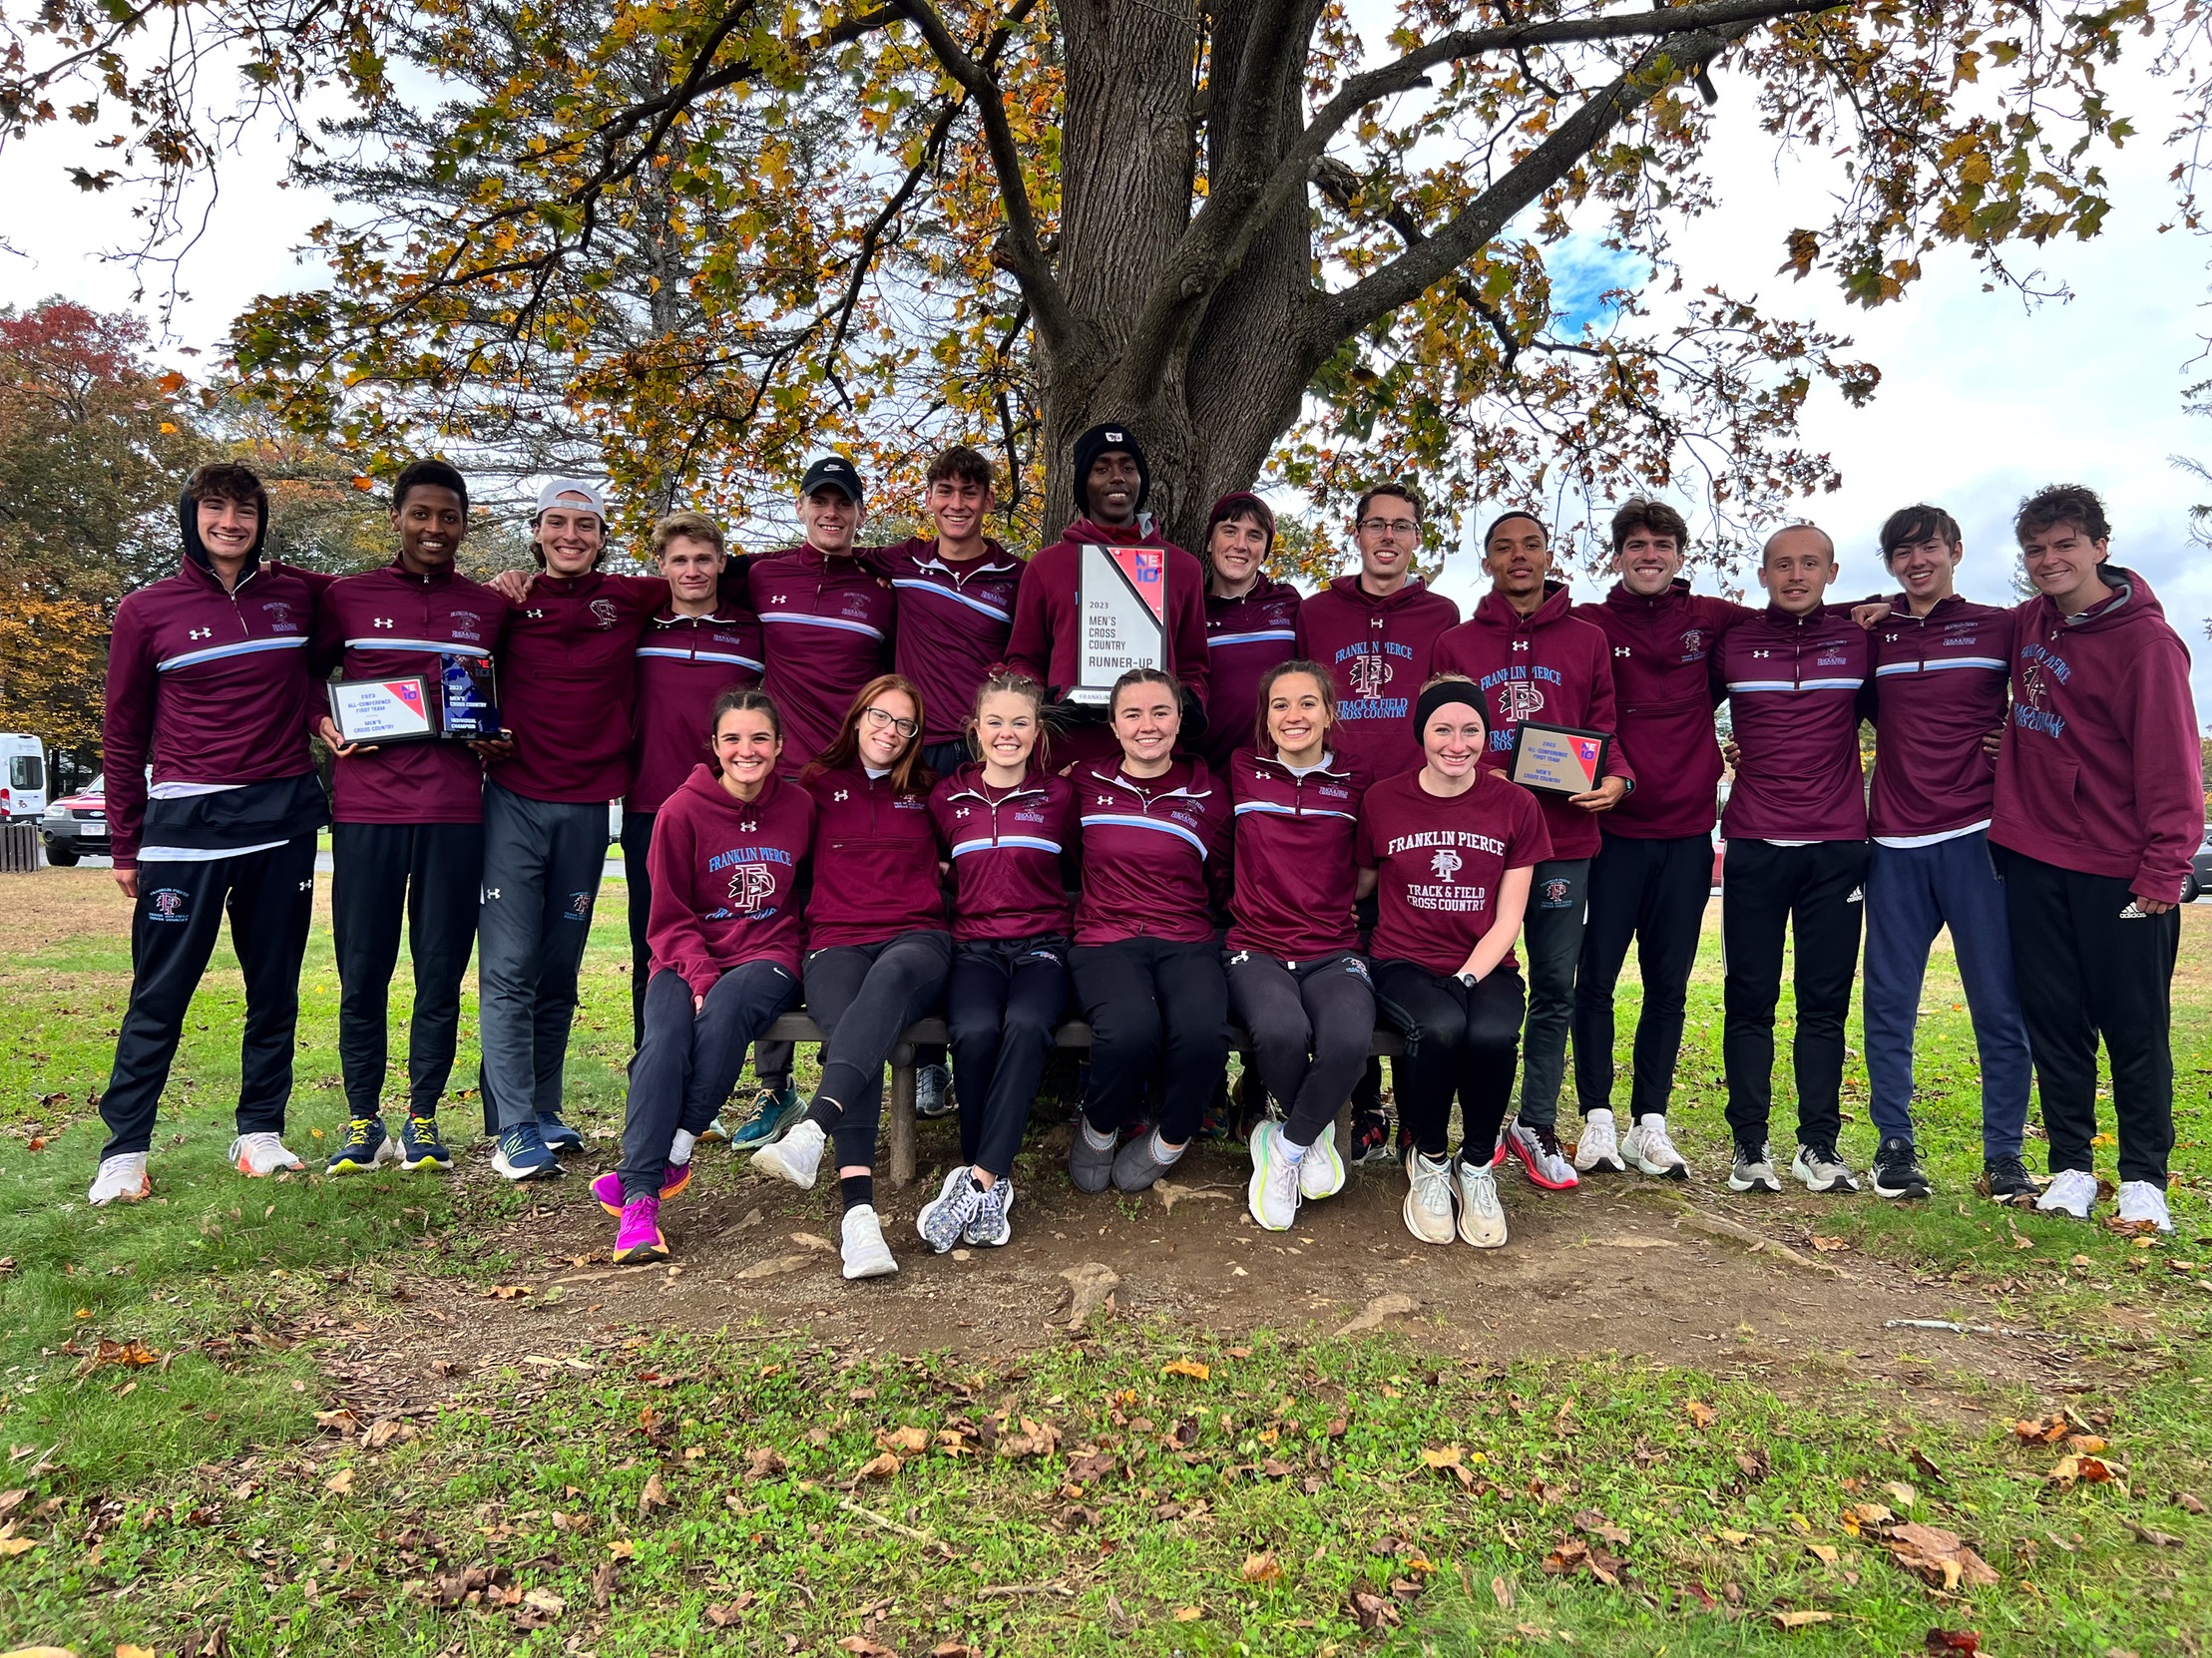 Cross Country: Ravens Compete at NE10 Championship; Summa Wins First Place Individually